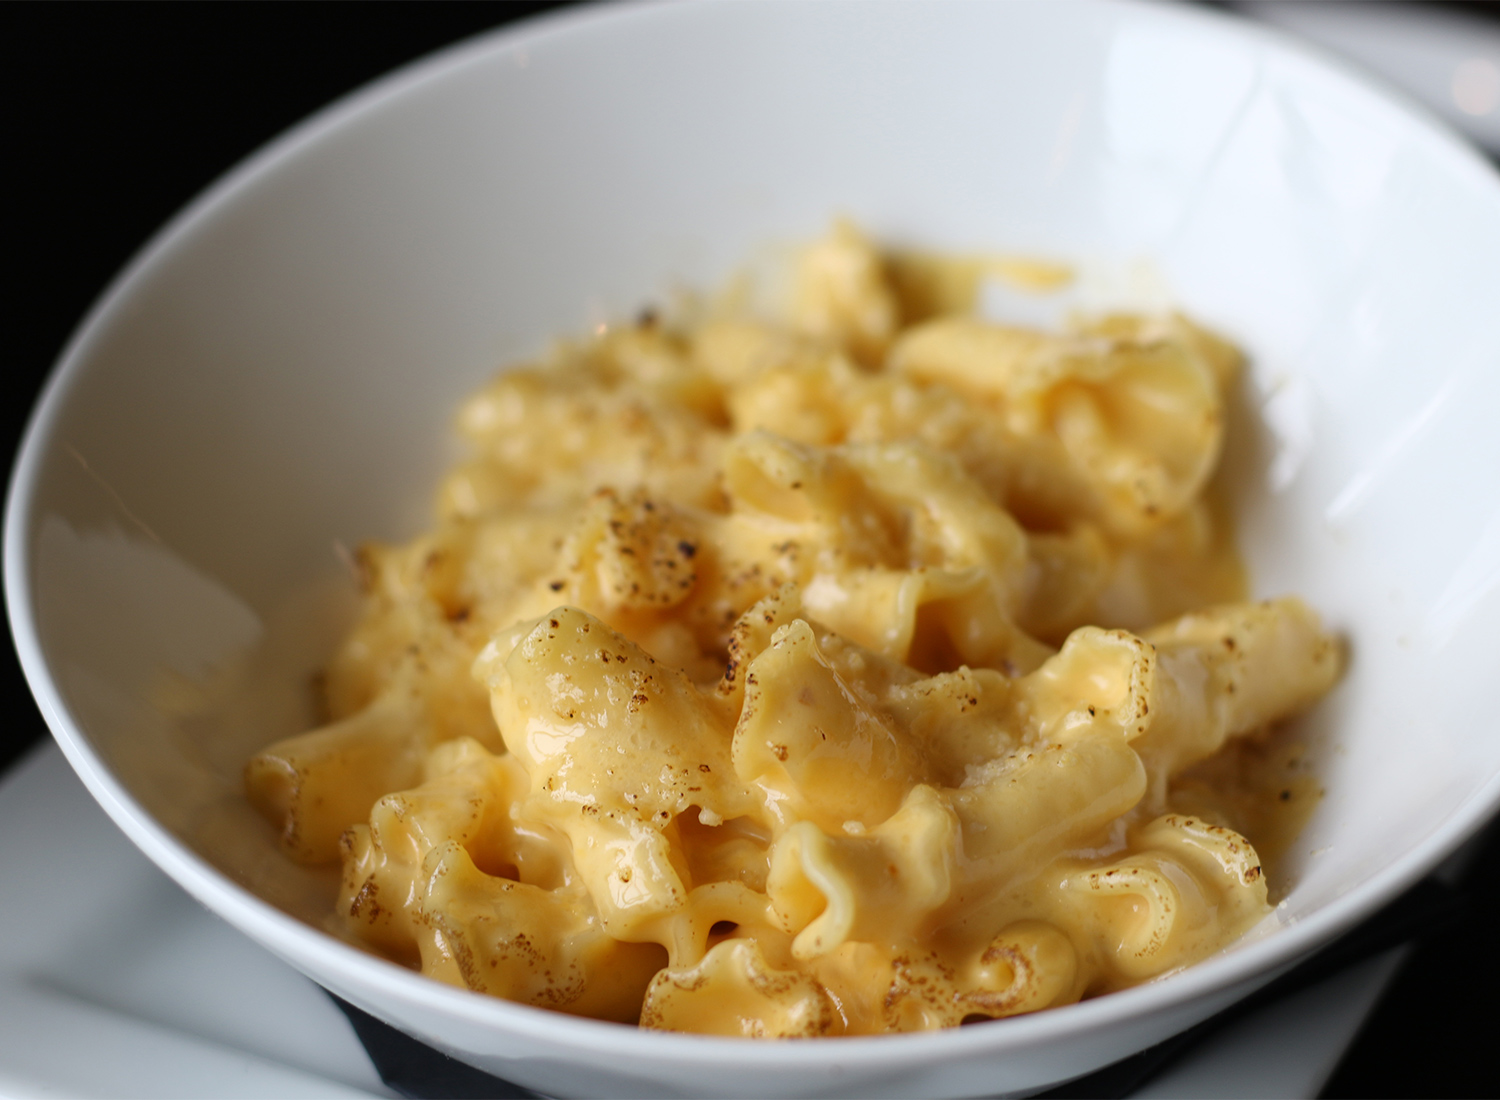 Mac and cheese at Victory House restaurant at Epicenter in santa rosa. Heather Irwin/PD